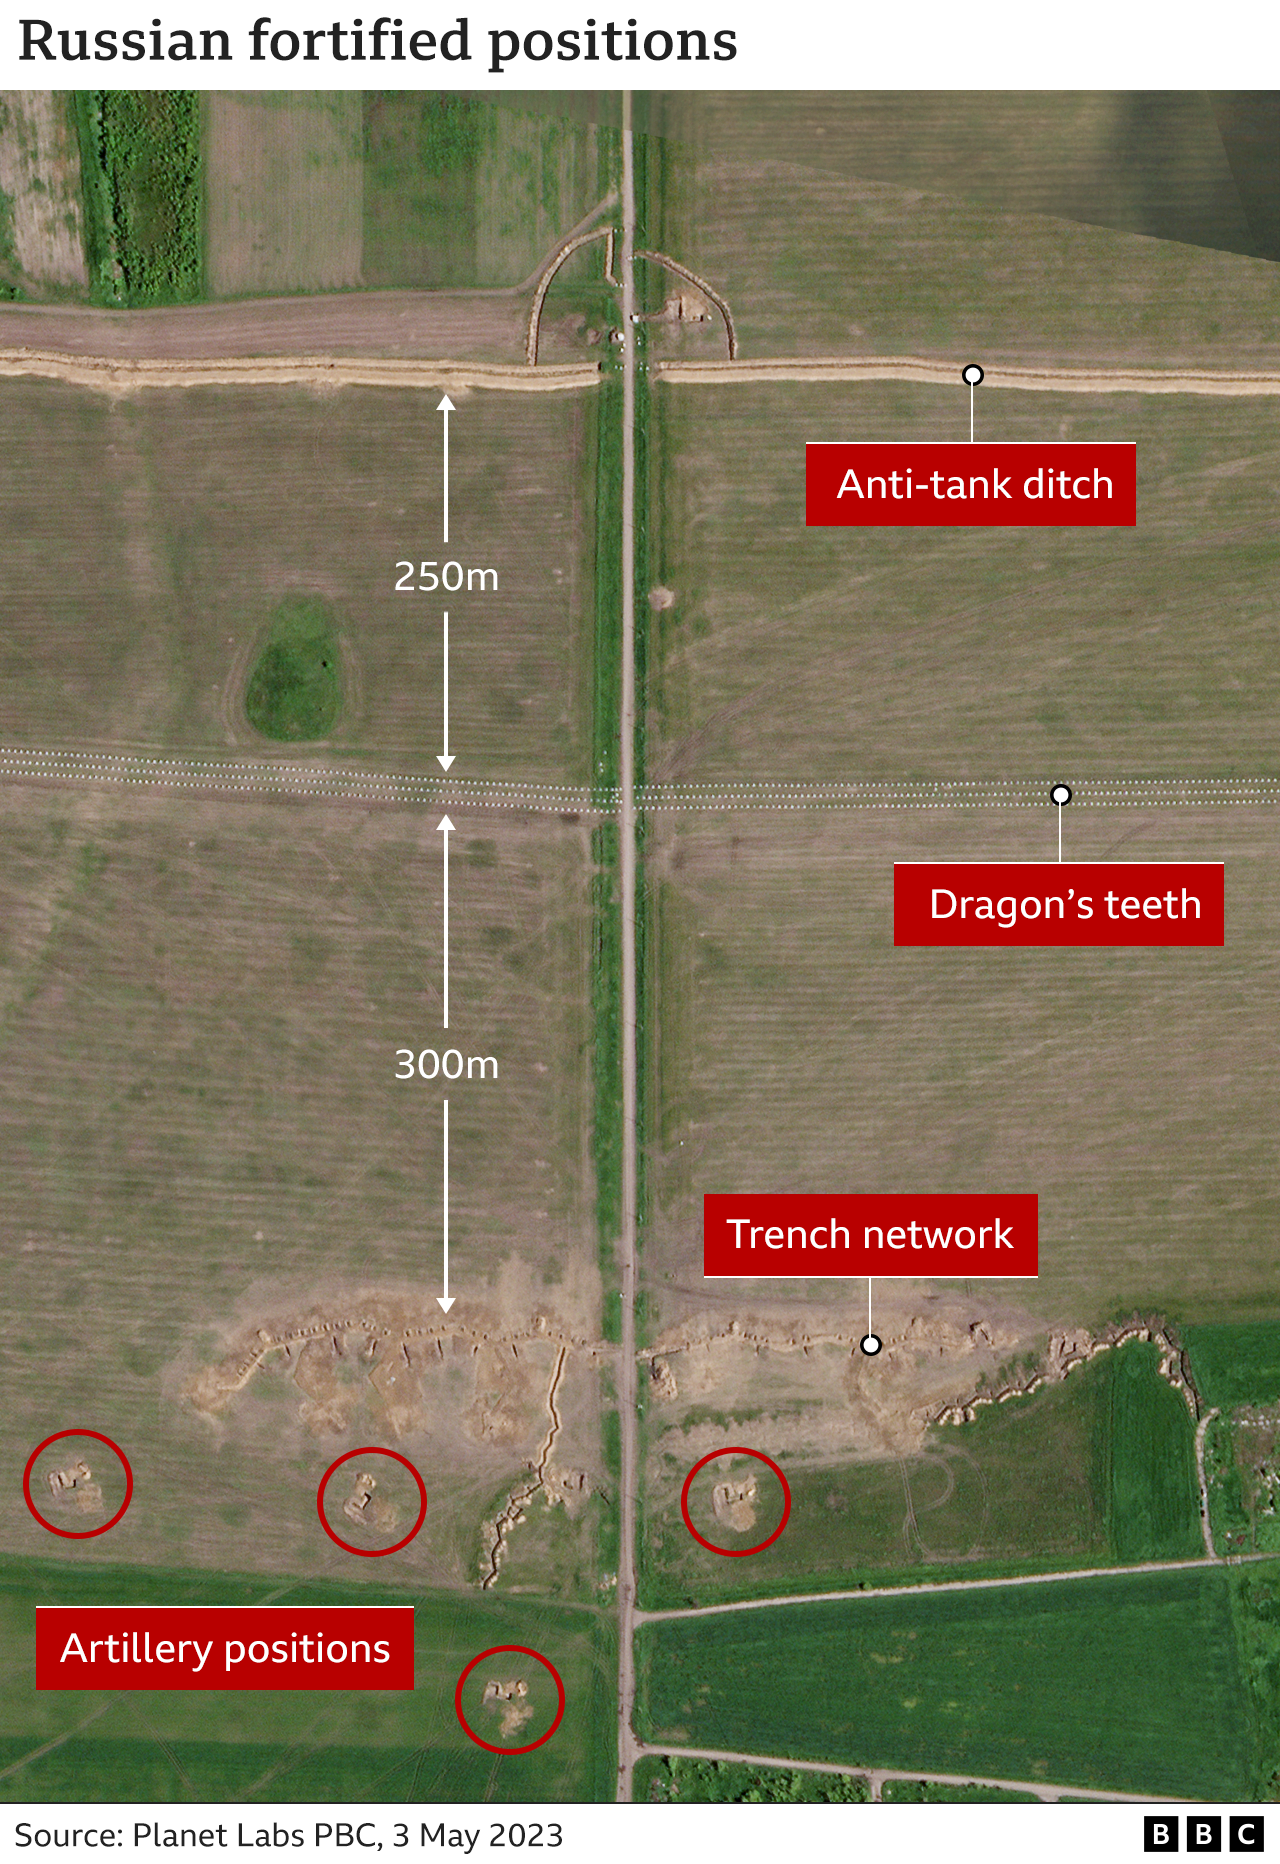 Satellite image showing an anti-tank ditch, followed by a row of "dragon's teeth" 250m away, and a trench network 300m further on. Artillery positions are marked behind the trenches.